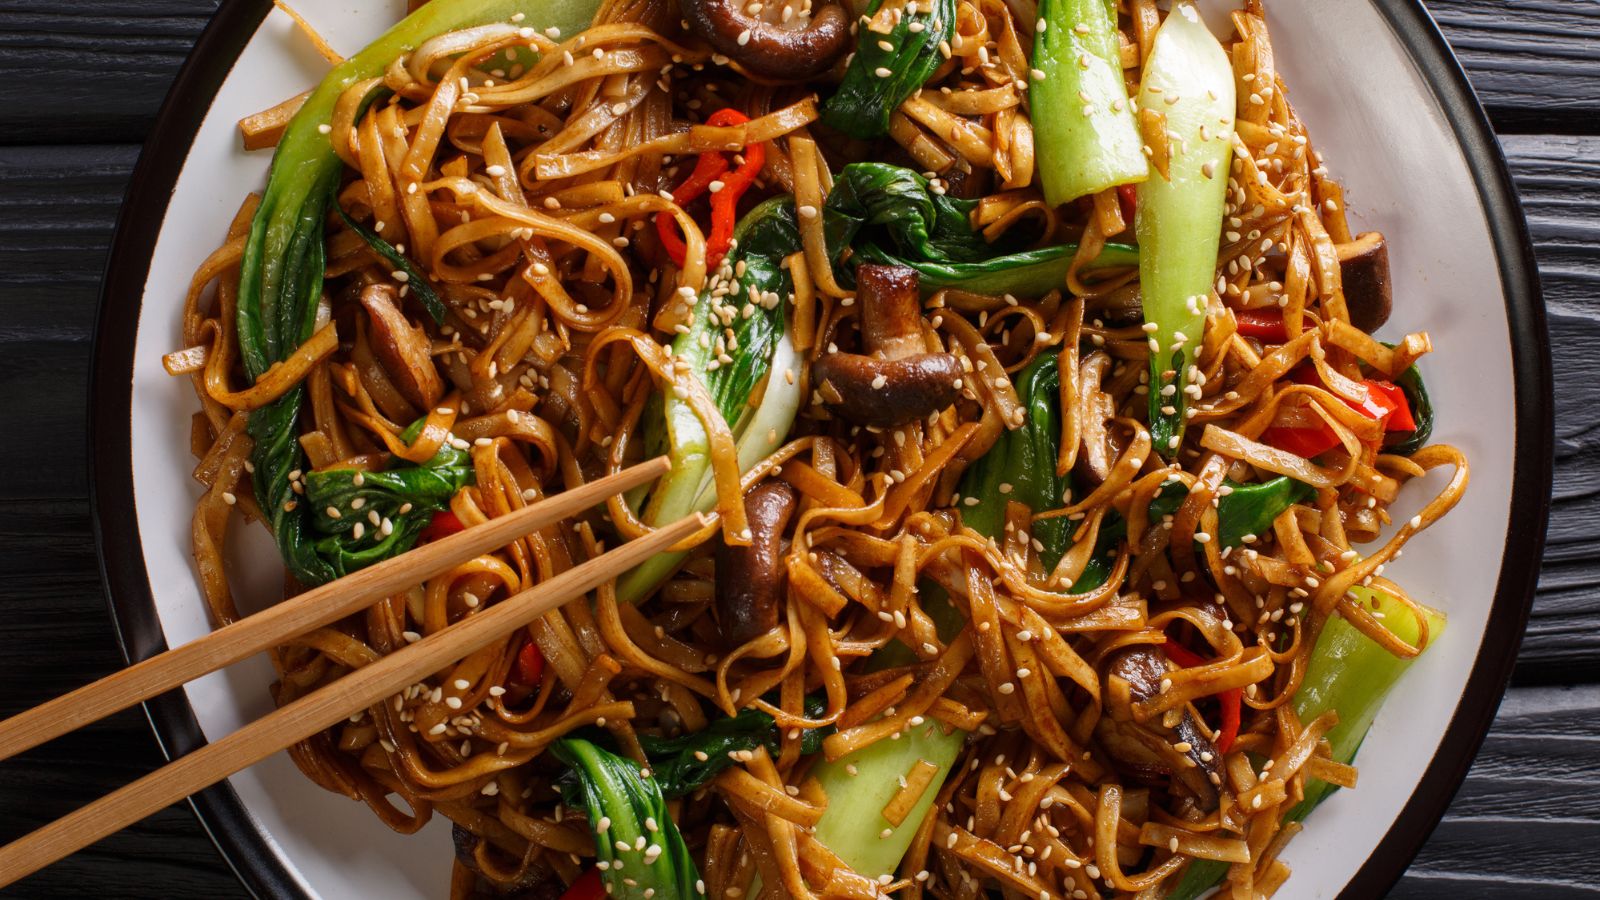 18 Easy Stir Fry Recipes for Quick and Tasty Dinners